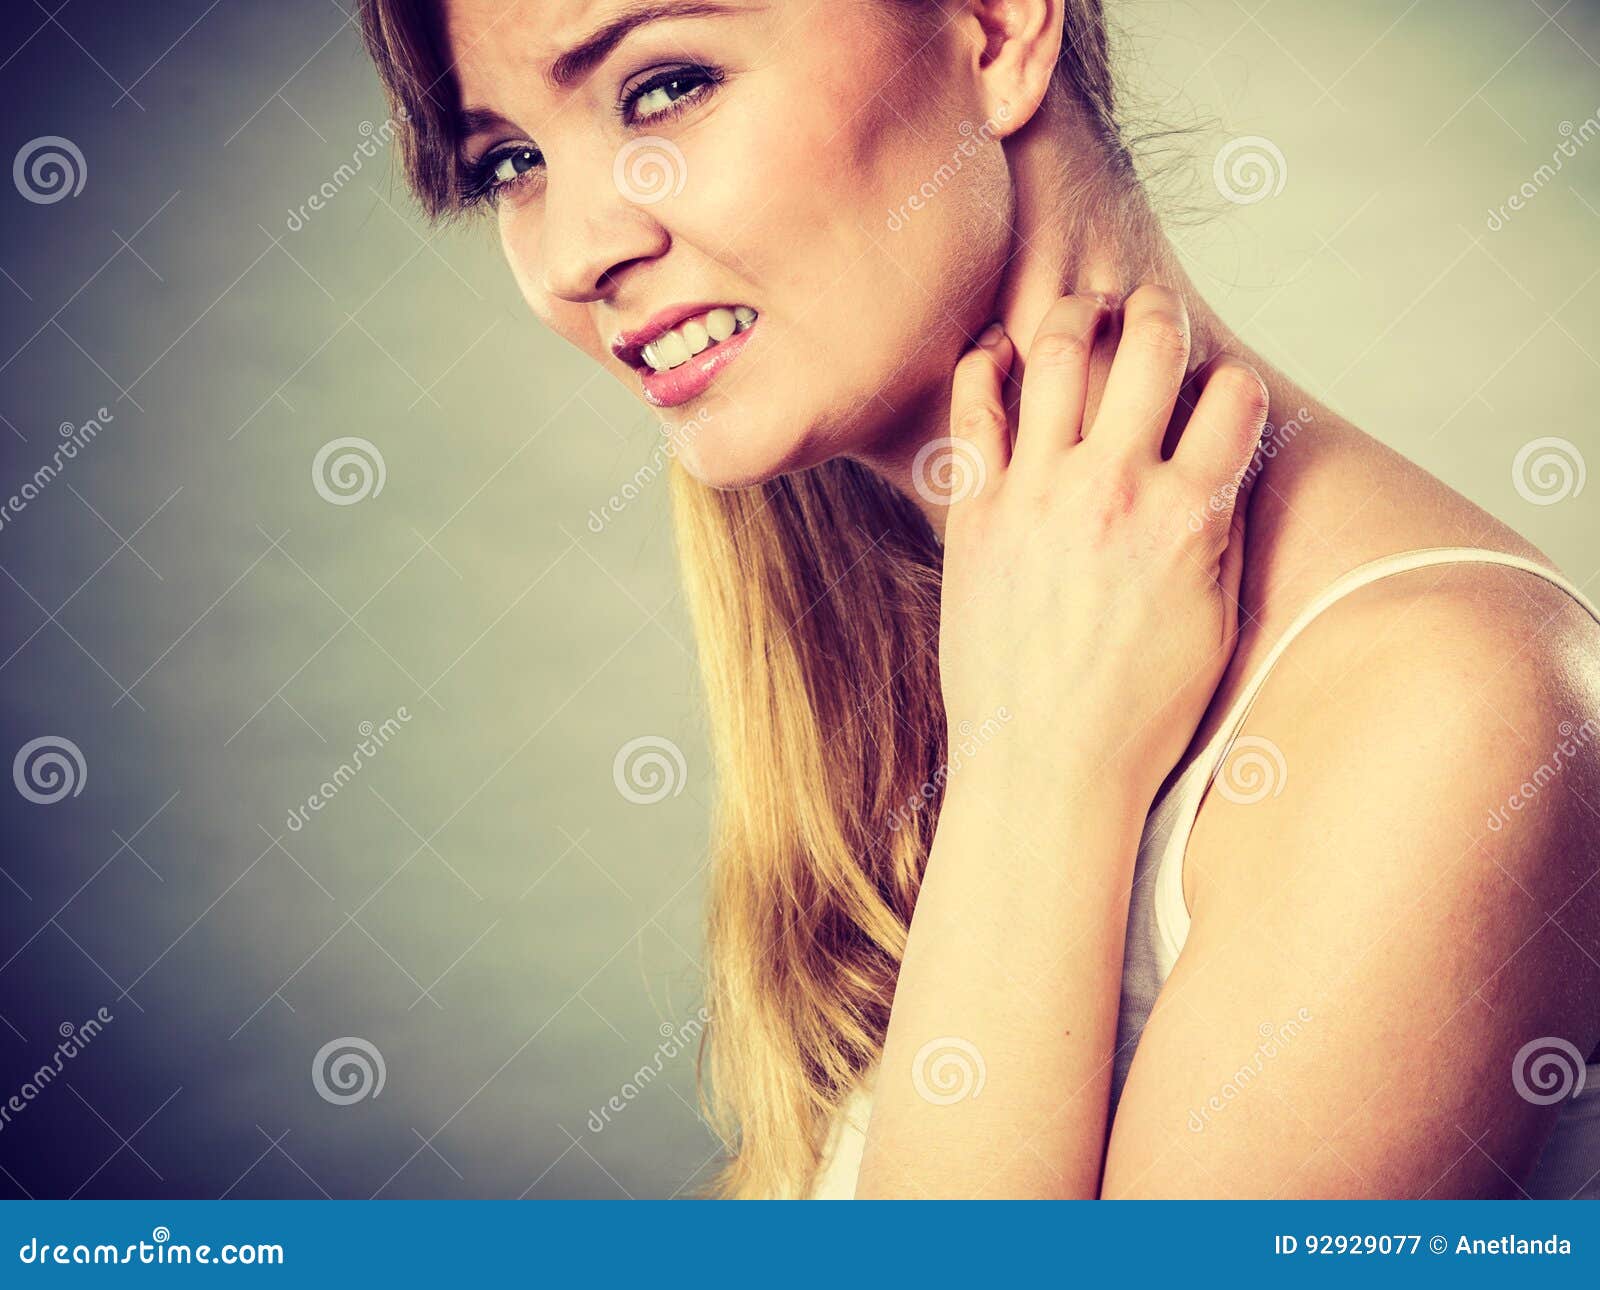 Woman Scratching Her Itchy Neck With Allergy Rash Royalty Free Stock